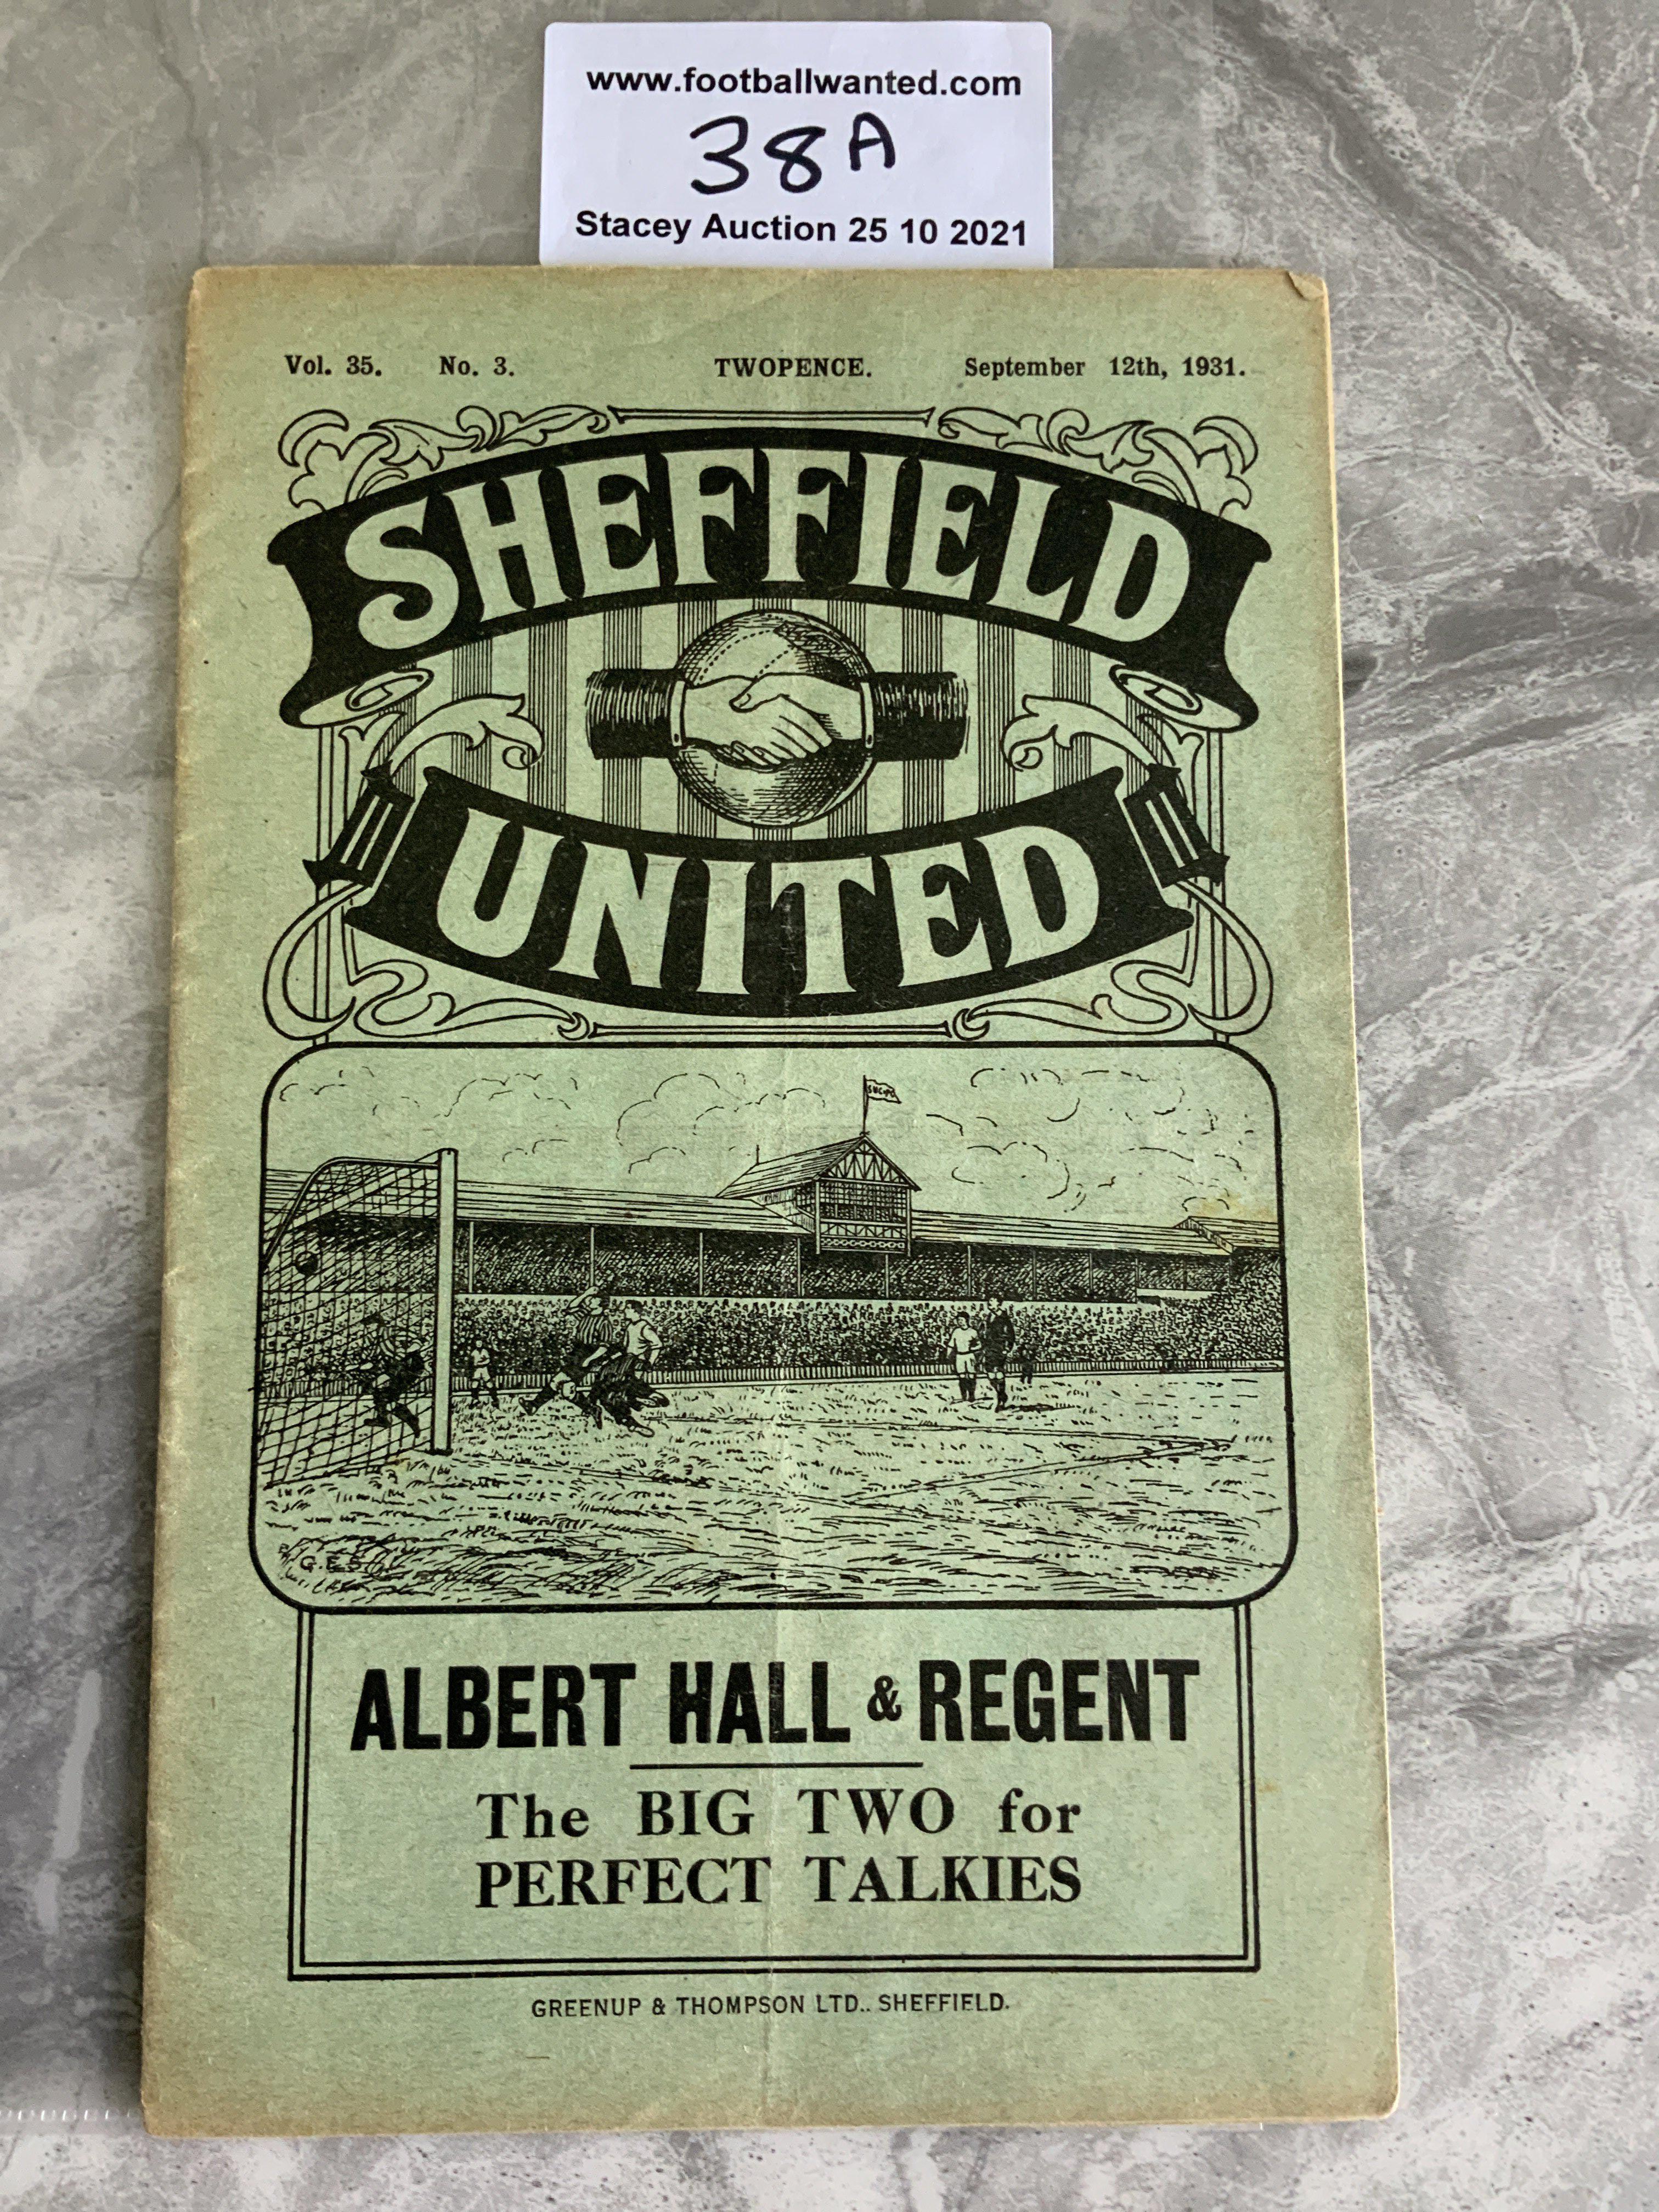 31/32 Sheffield United v West Brom Football Programme: Very good condition with no team changes.